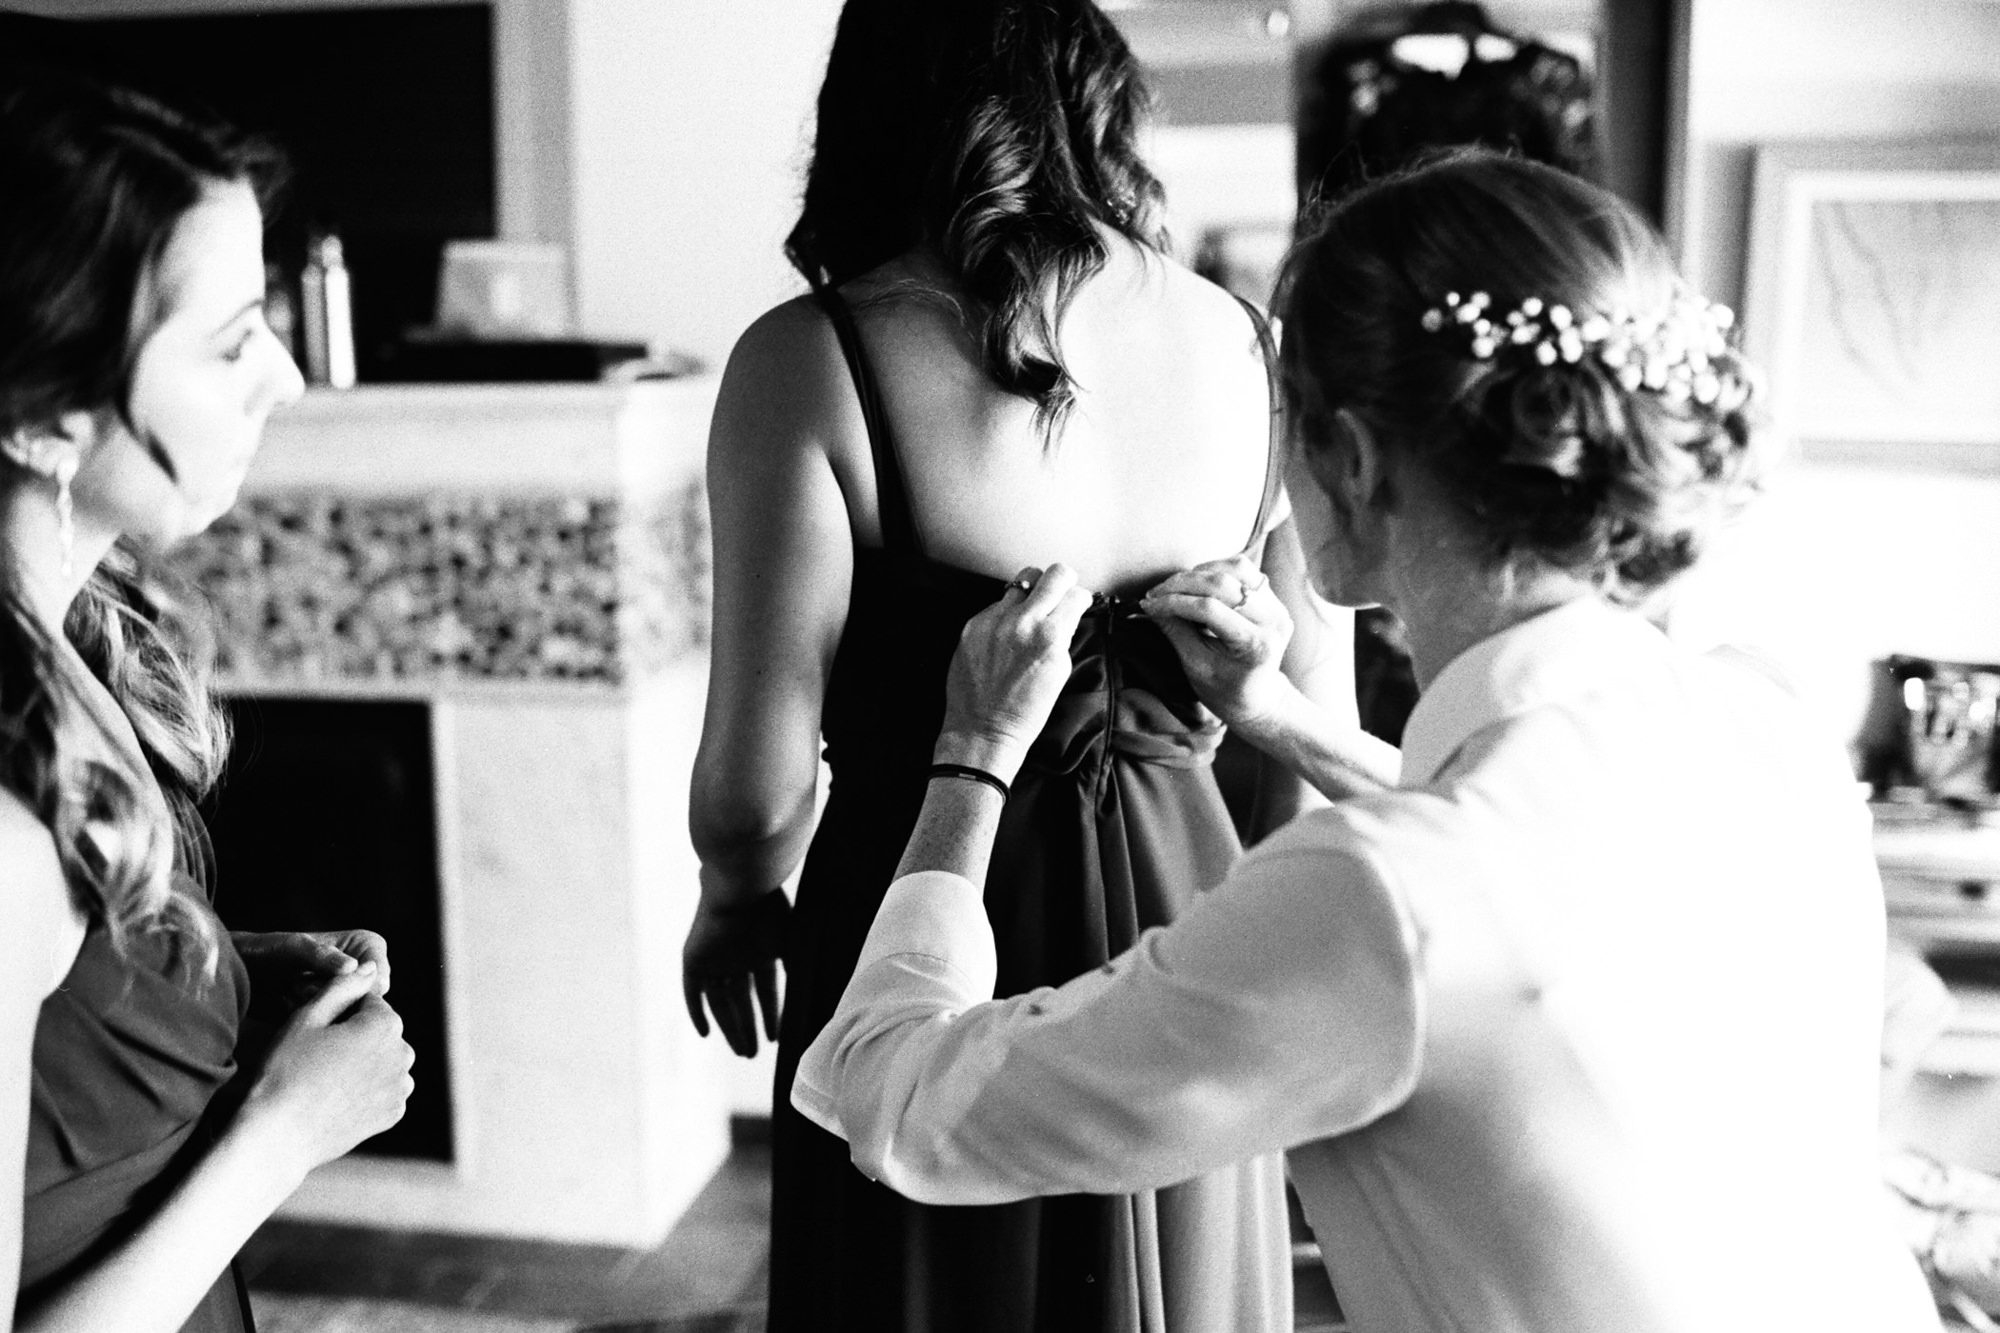 Katherine helping her bridesmaids get ready at Kingston House, a wedding venue in Kingston, WA.